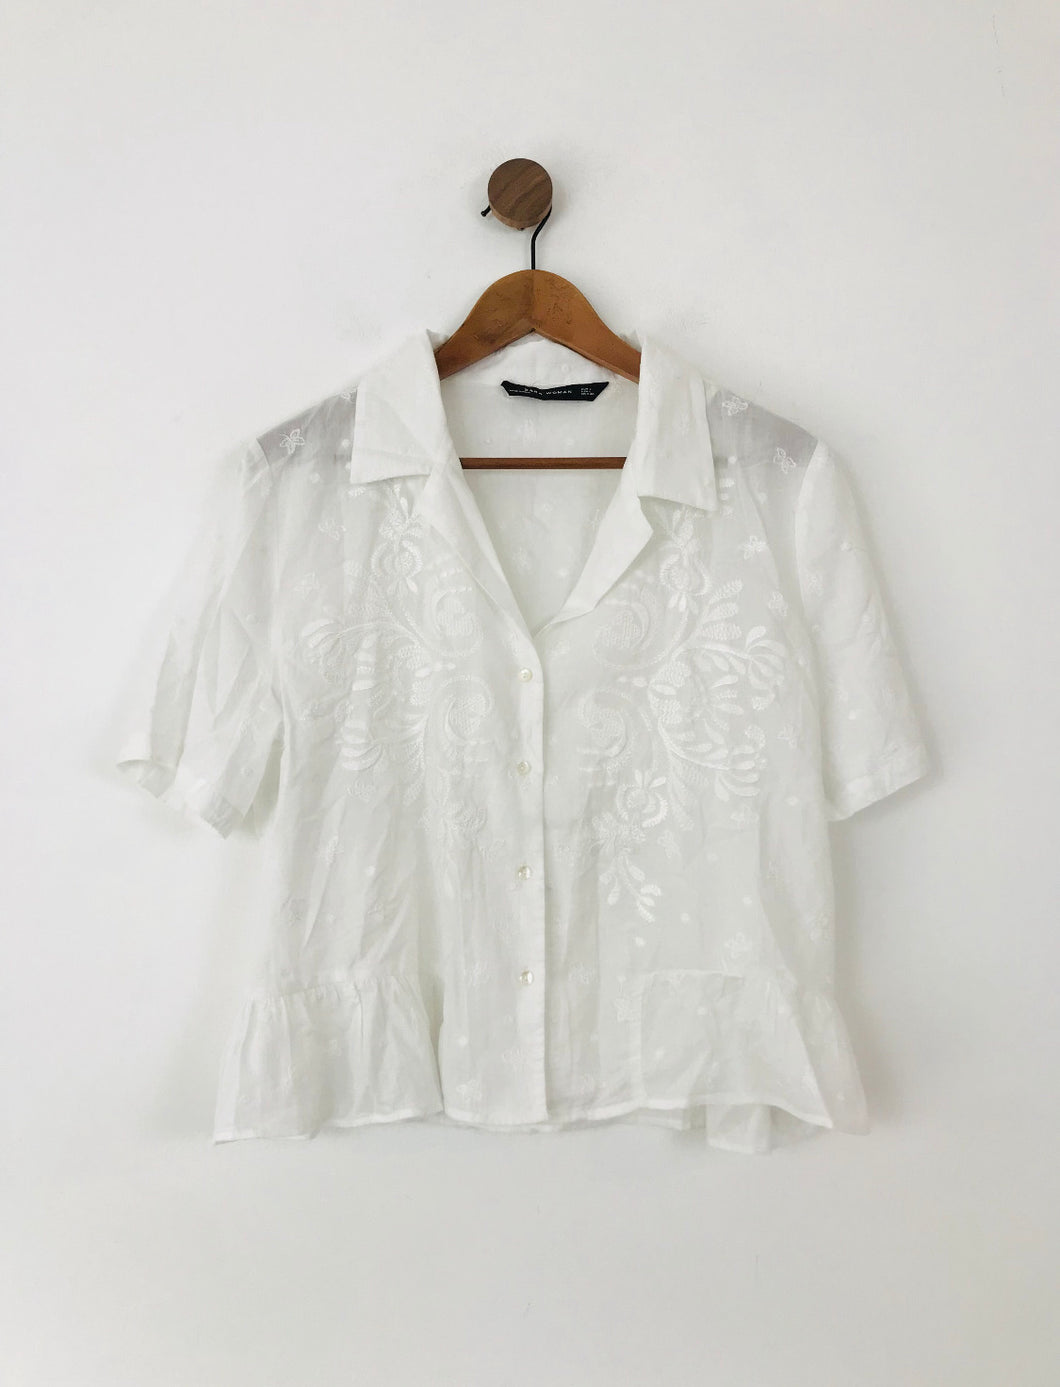 Zara Women's Embroidered Button Up Blouse | L UK14 | White